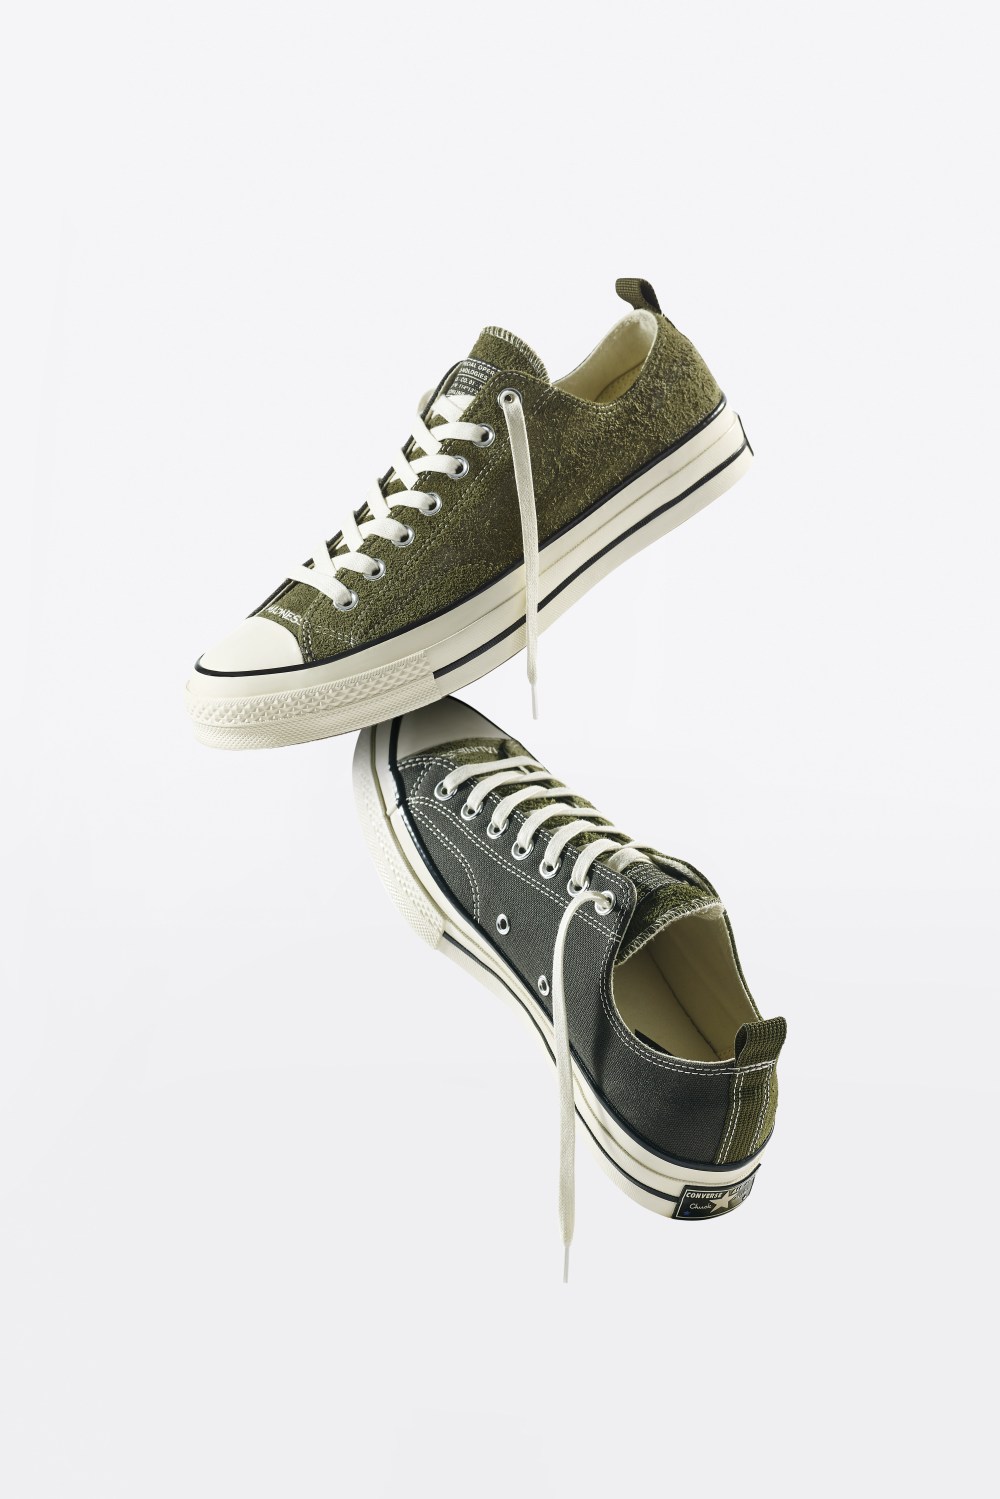 MADNESS and Converse teams up for a take on the Chuck 70's — eye_C